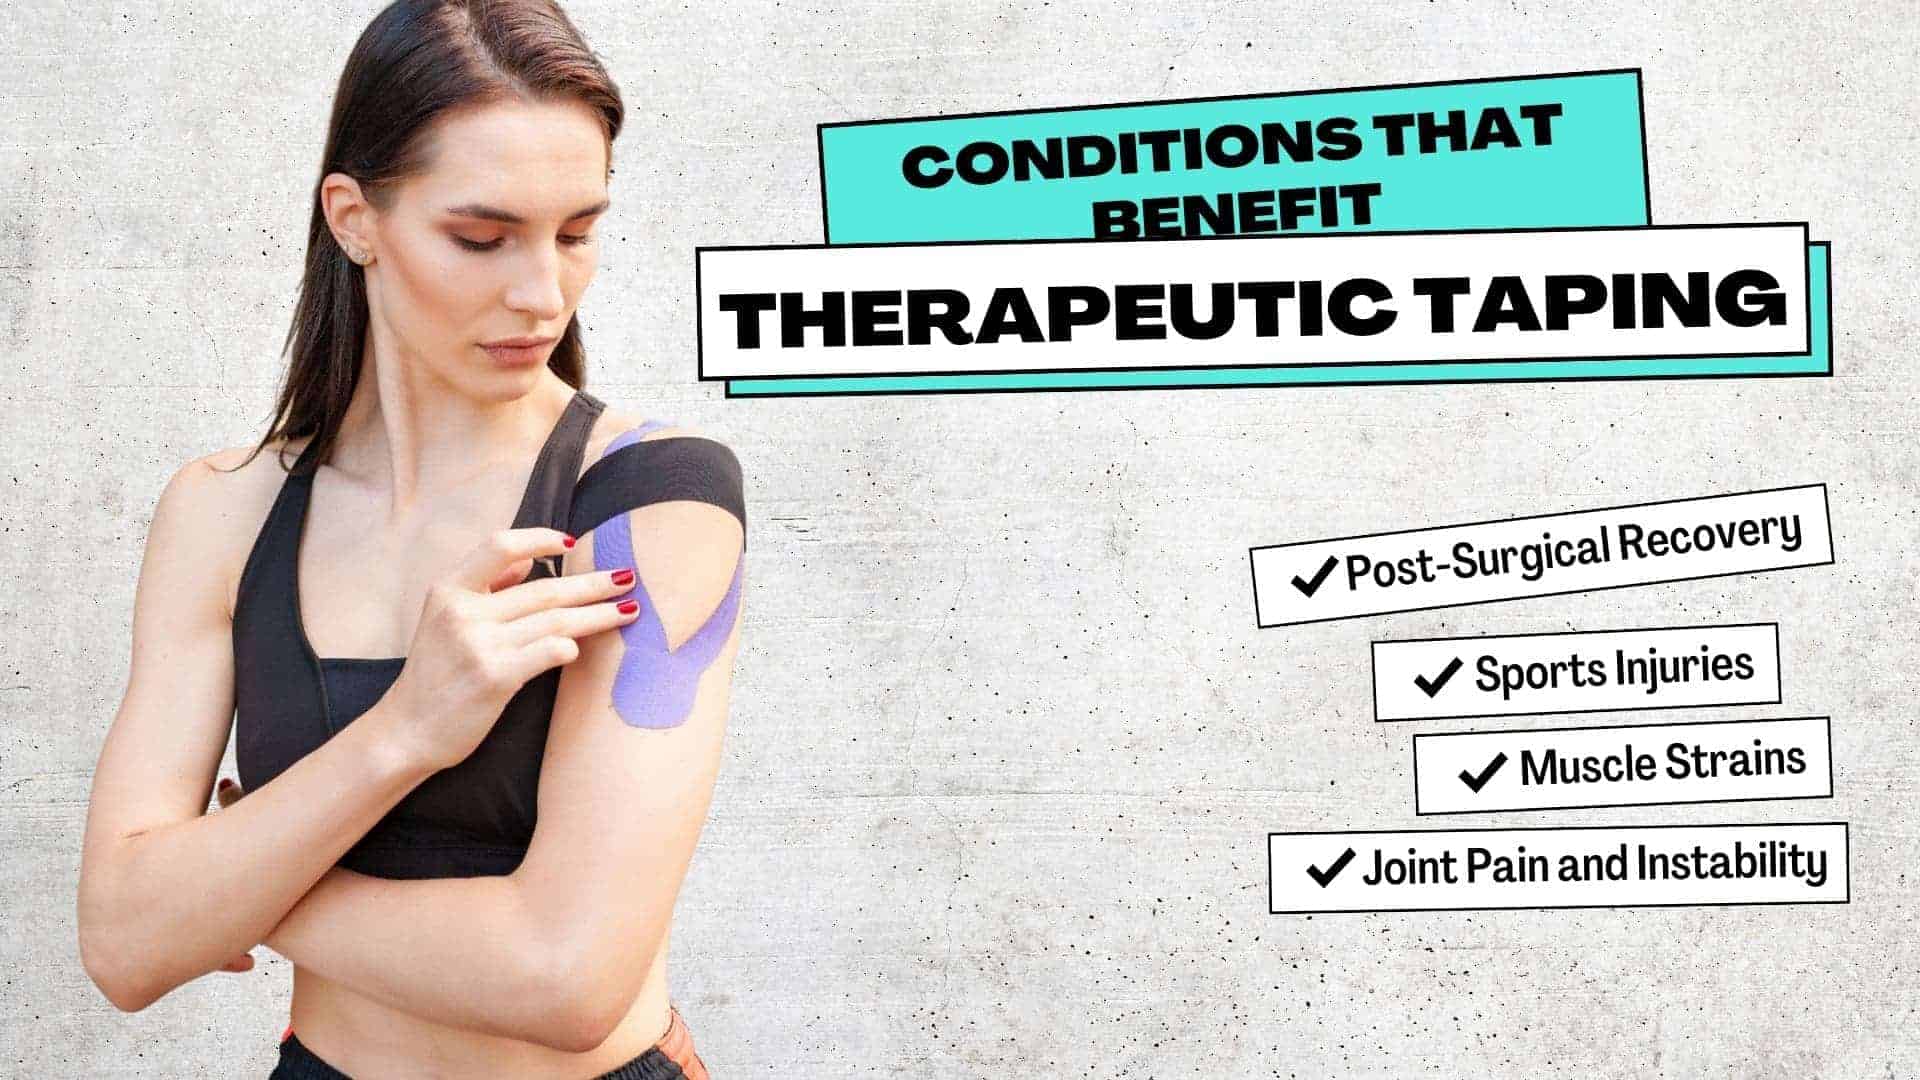 Kinesiology Taping Benefits Usage And Application Techniques A Comprehensive Guide 4876